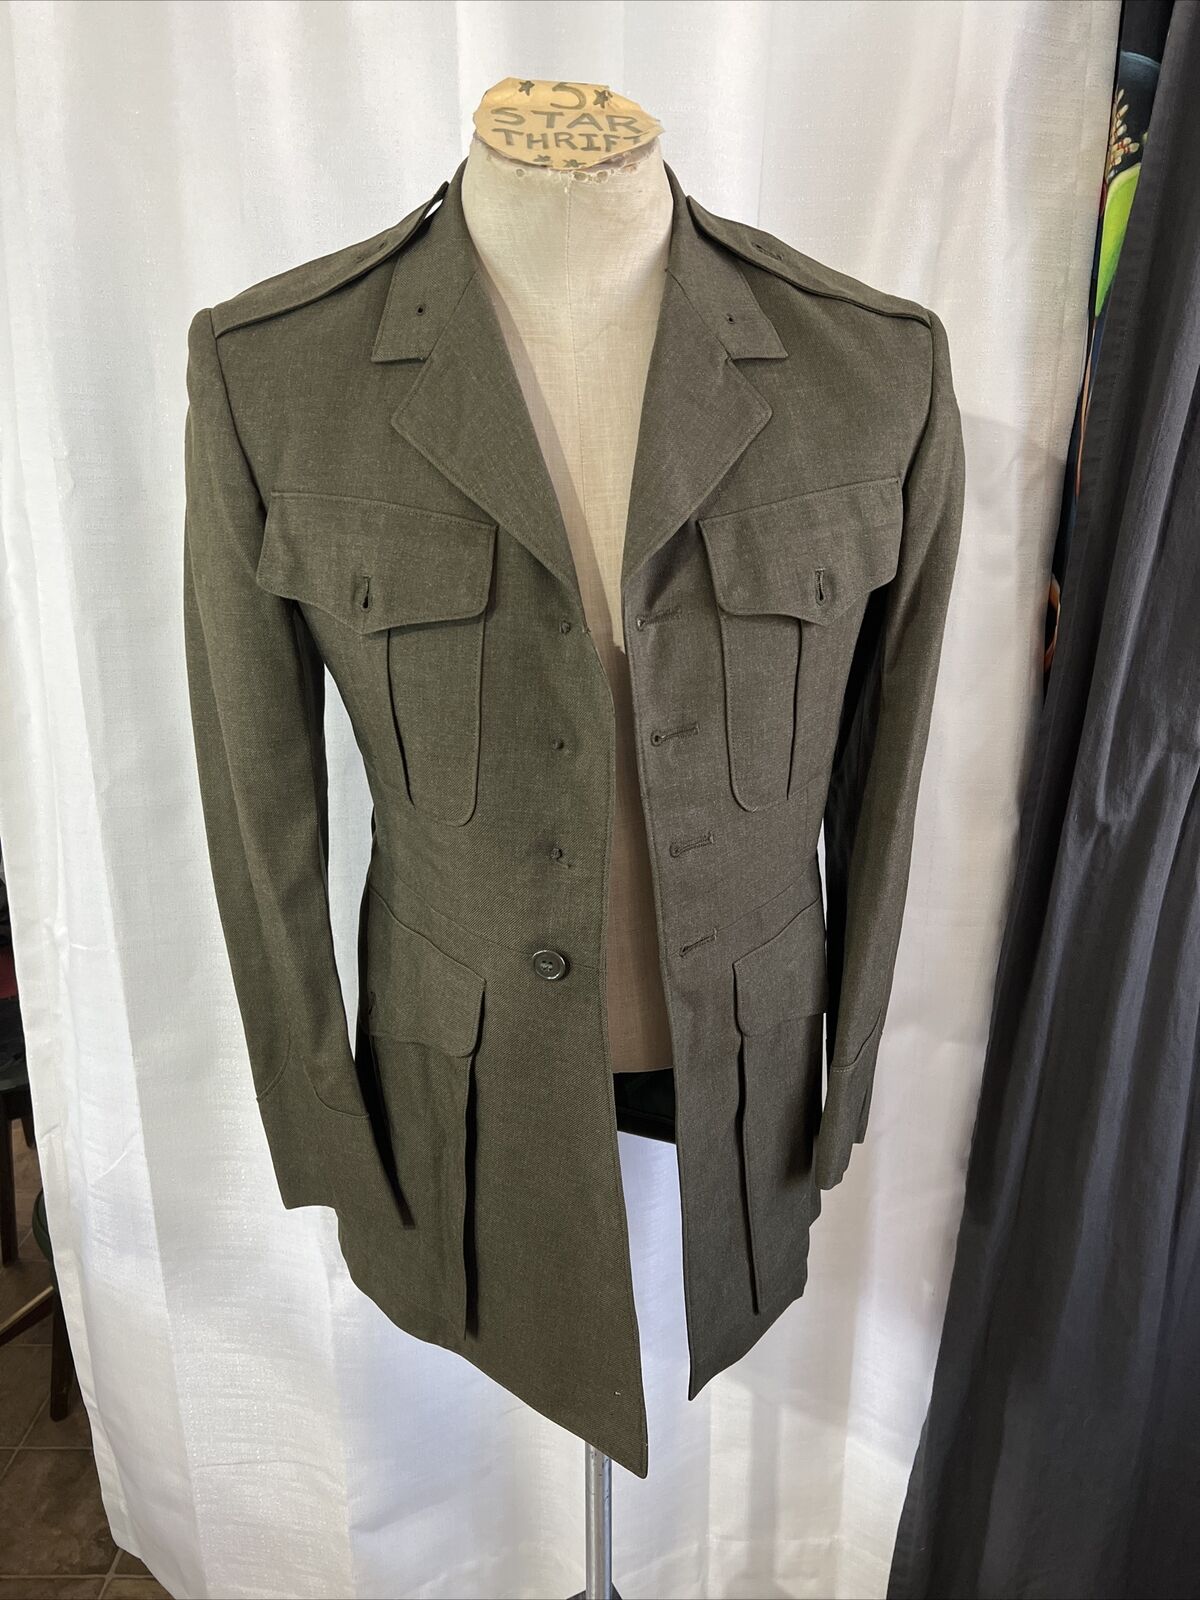 1967 VIETNAM WAR US ARMY WOOL SERGE GREEN COAT MENS VINTAGE SMALL *NEEDS BUTTONS